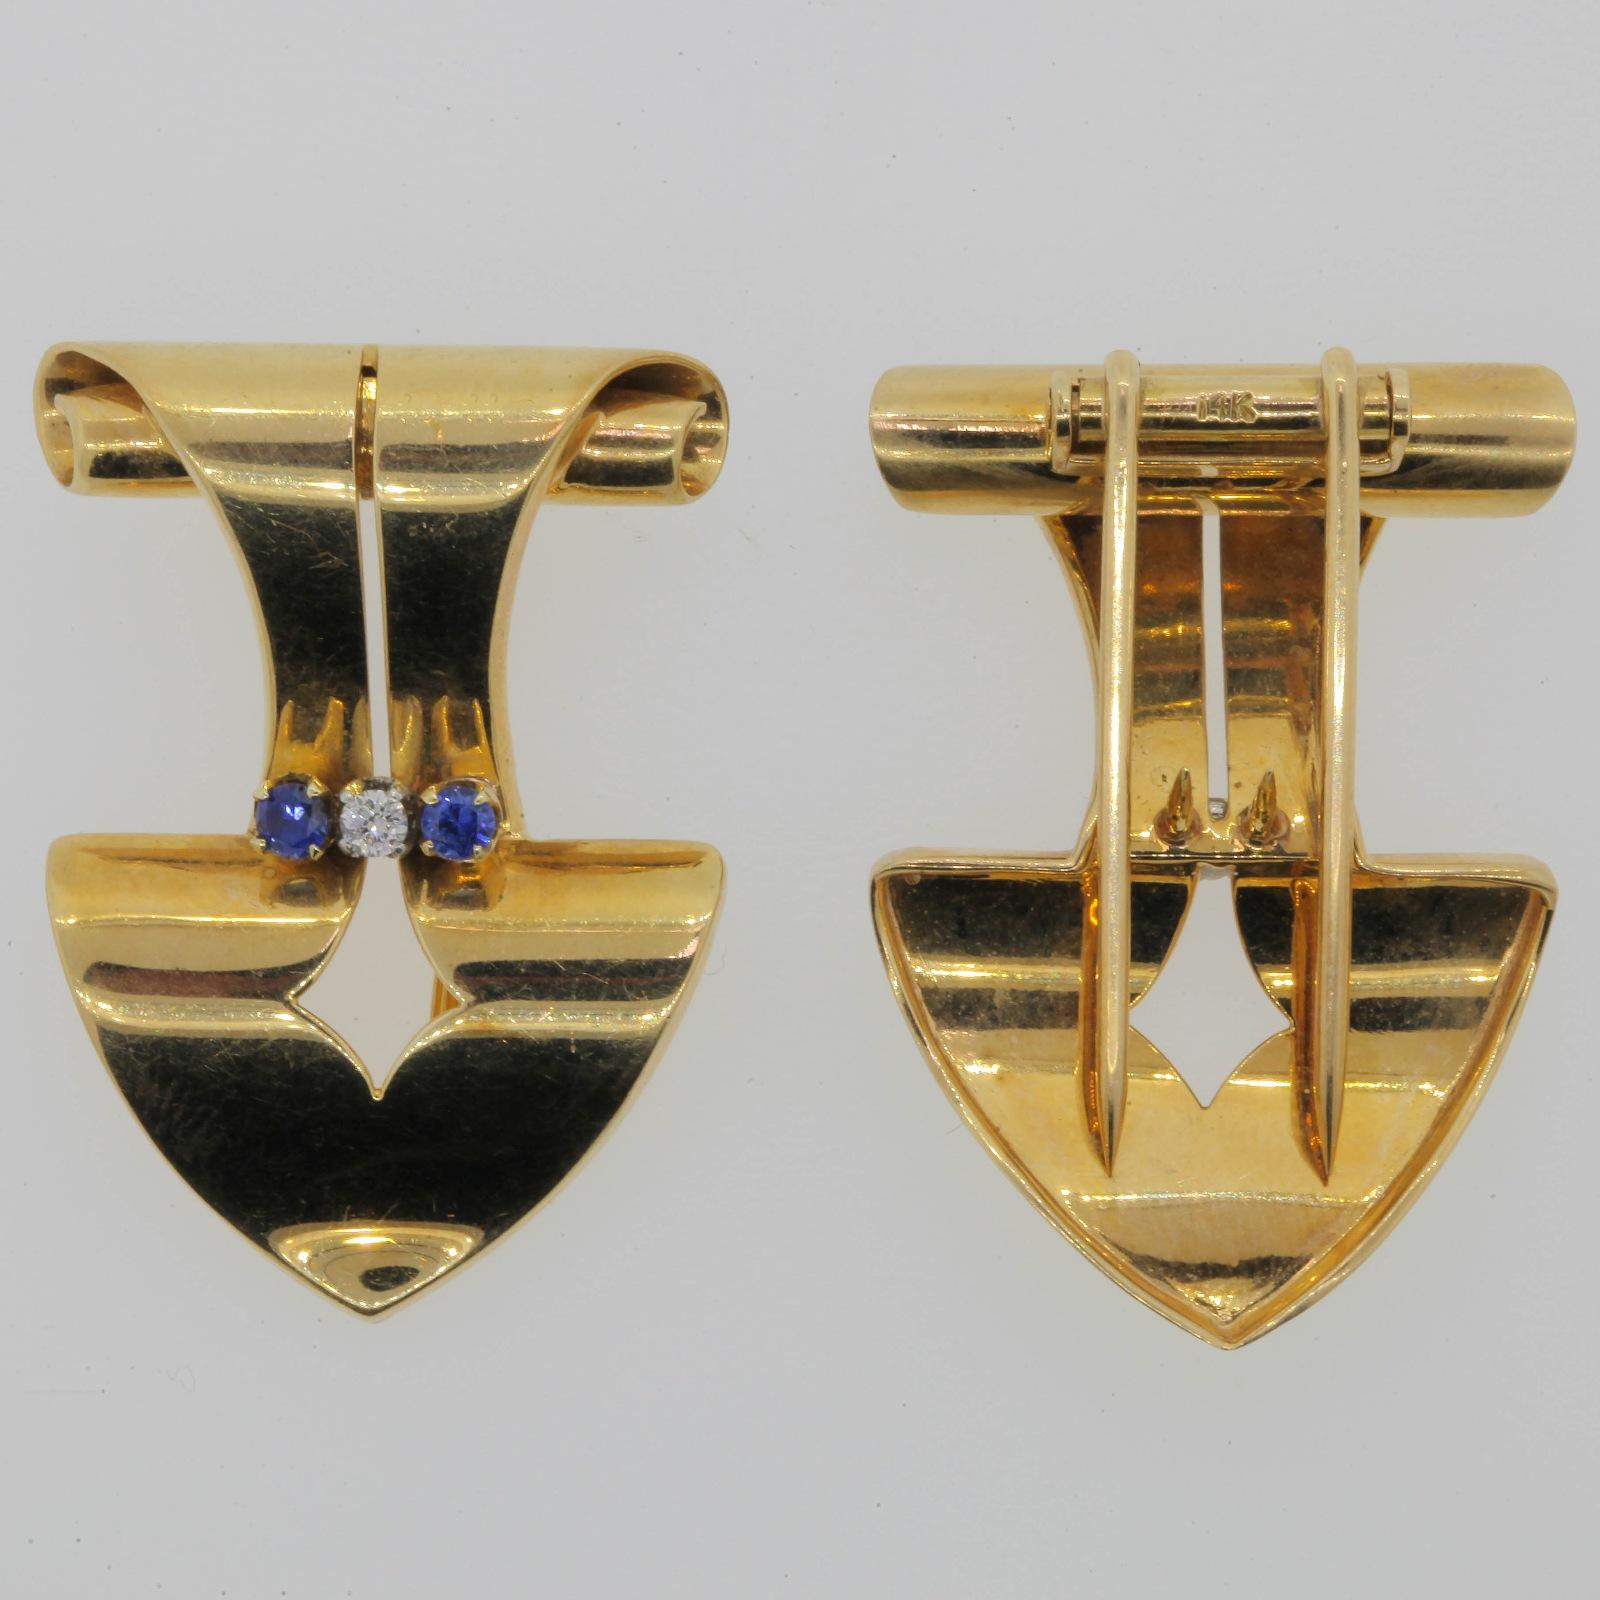 Stylish 1940s 14KT yellow gold clips/brooches.  A 0.07 carat white Diamond and two Ceylon Sapphires weighing 0.40 carat accent these classic Retro clips.  A perfect accessory to your business suit.  